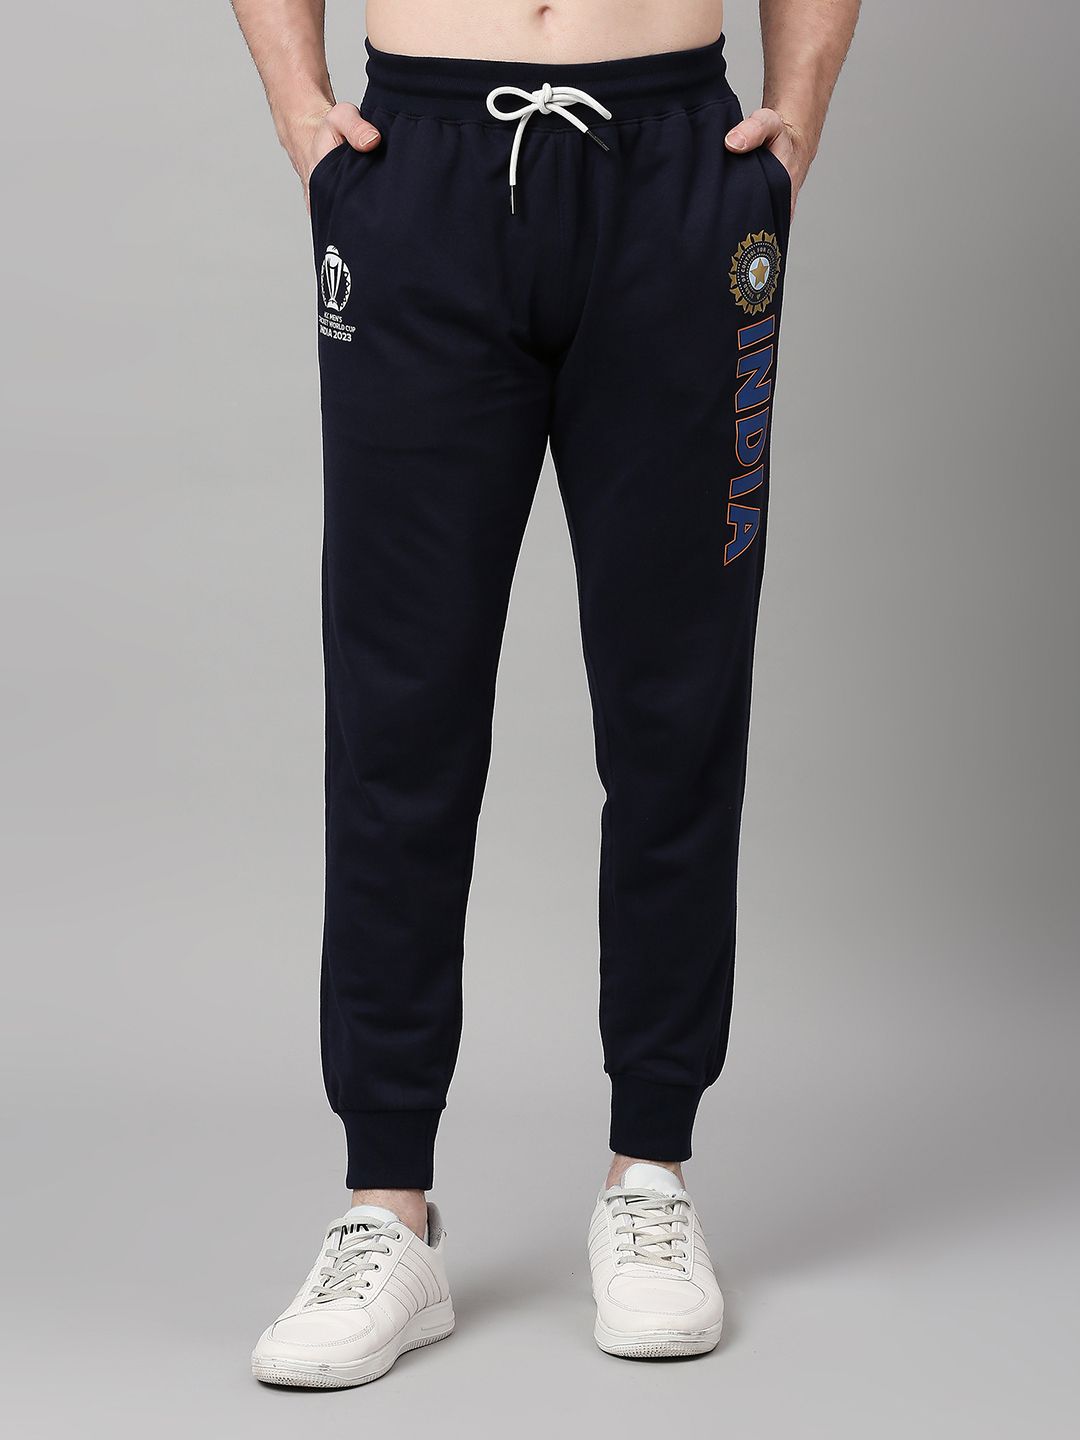 Buy Official ICC CWC-23 Men Navy Blue Solid Jogger from FanCode Shop.